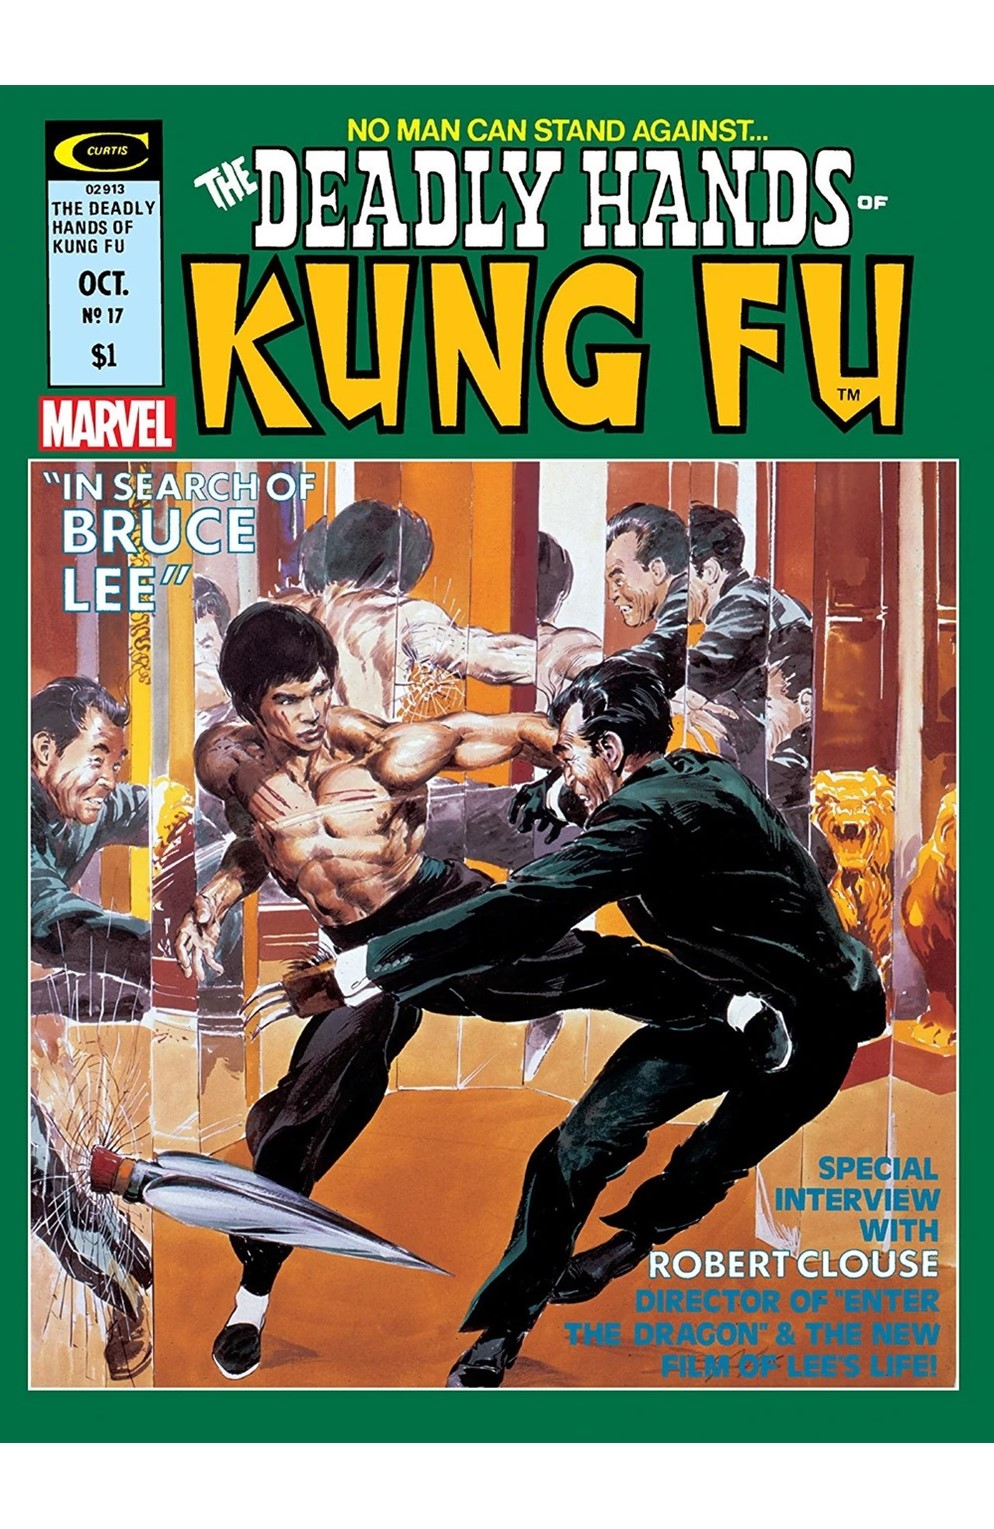 The Deadly Hands of Kung Fu Volume 1 #17